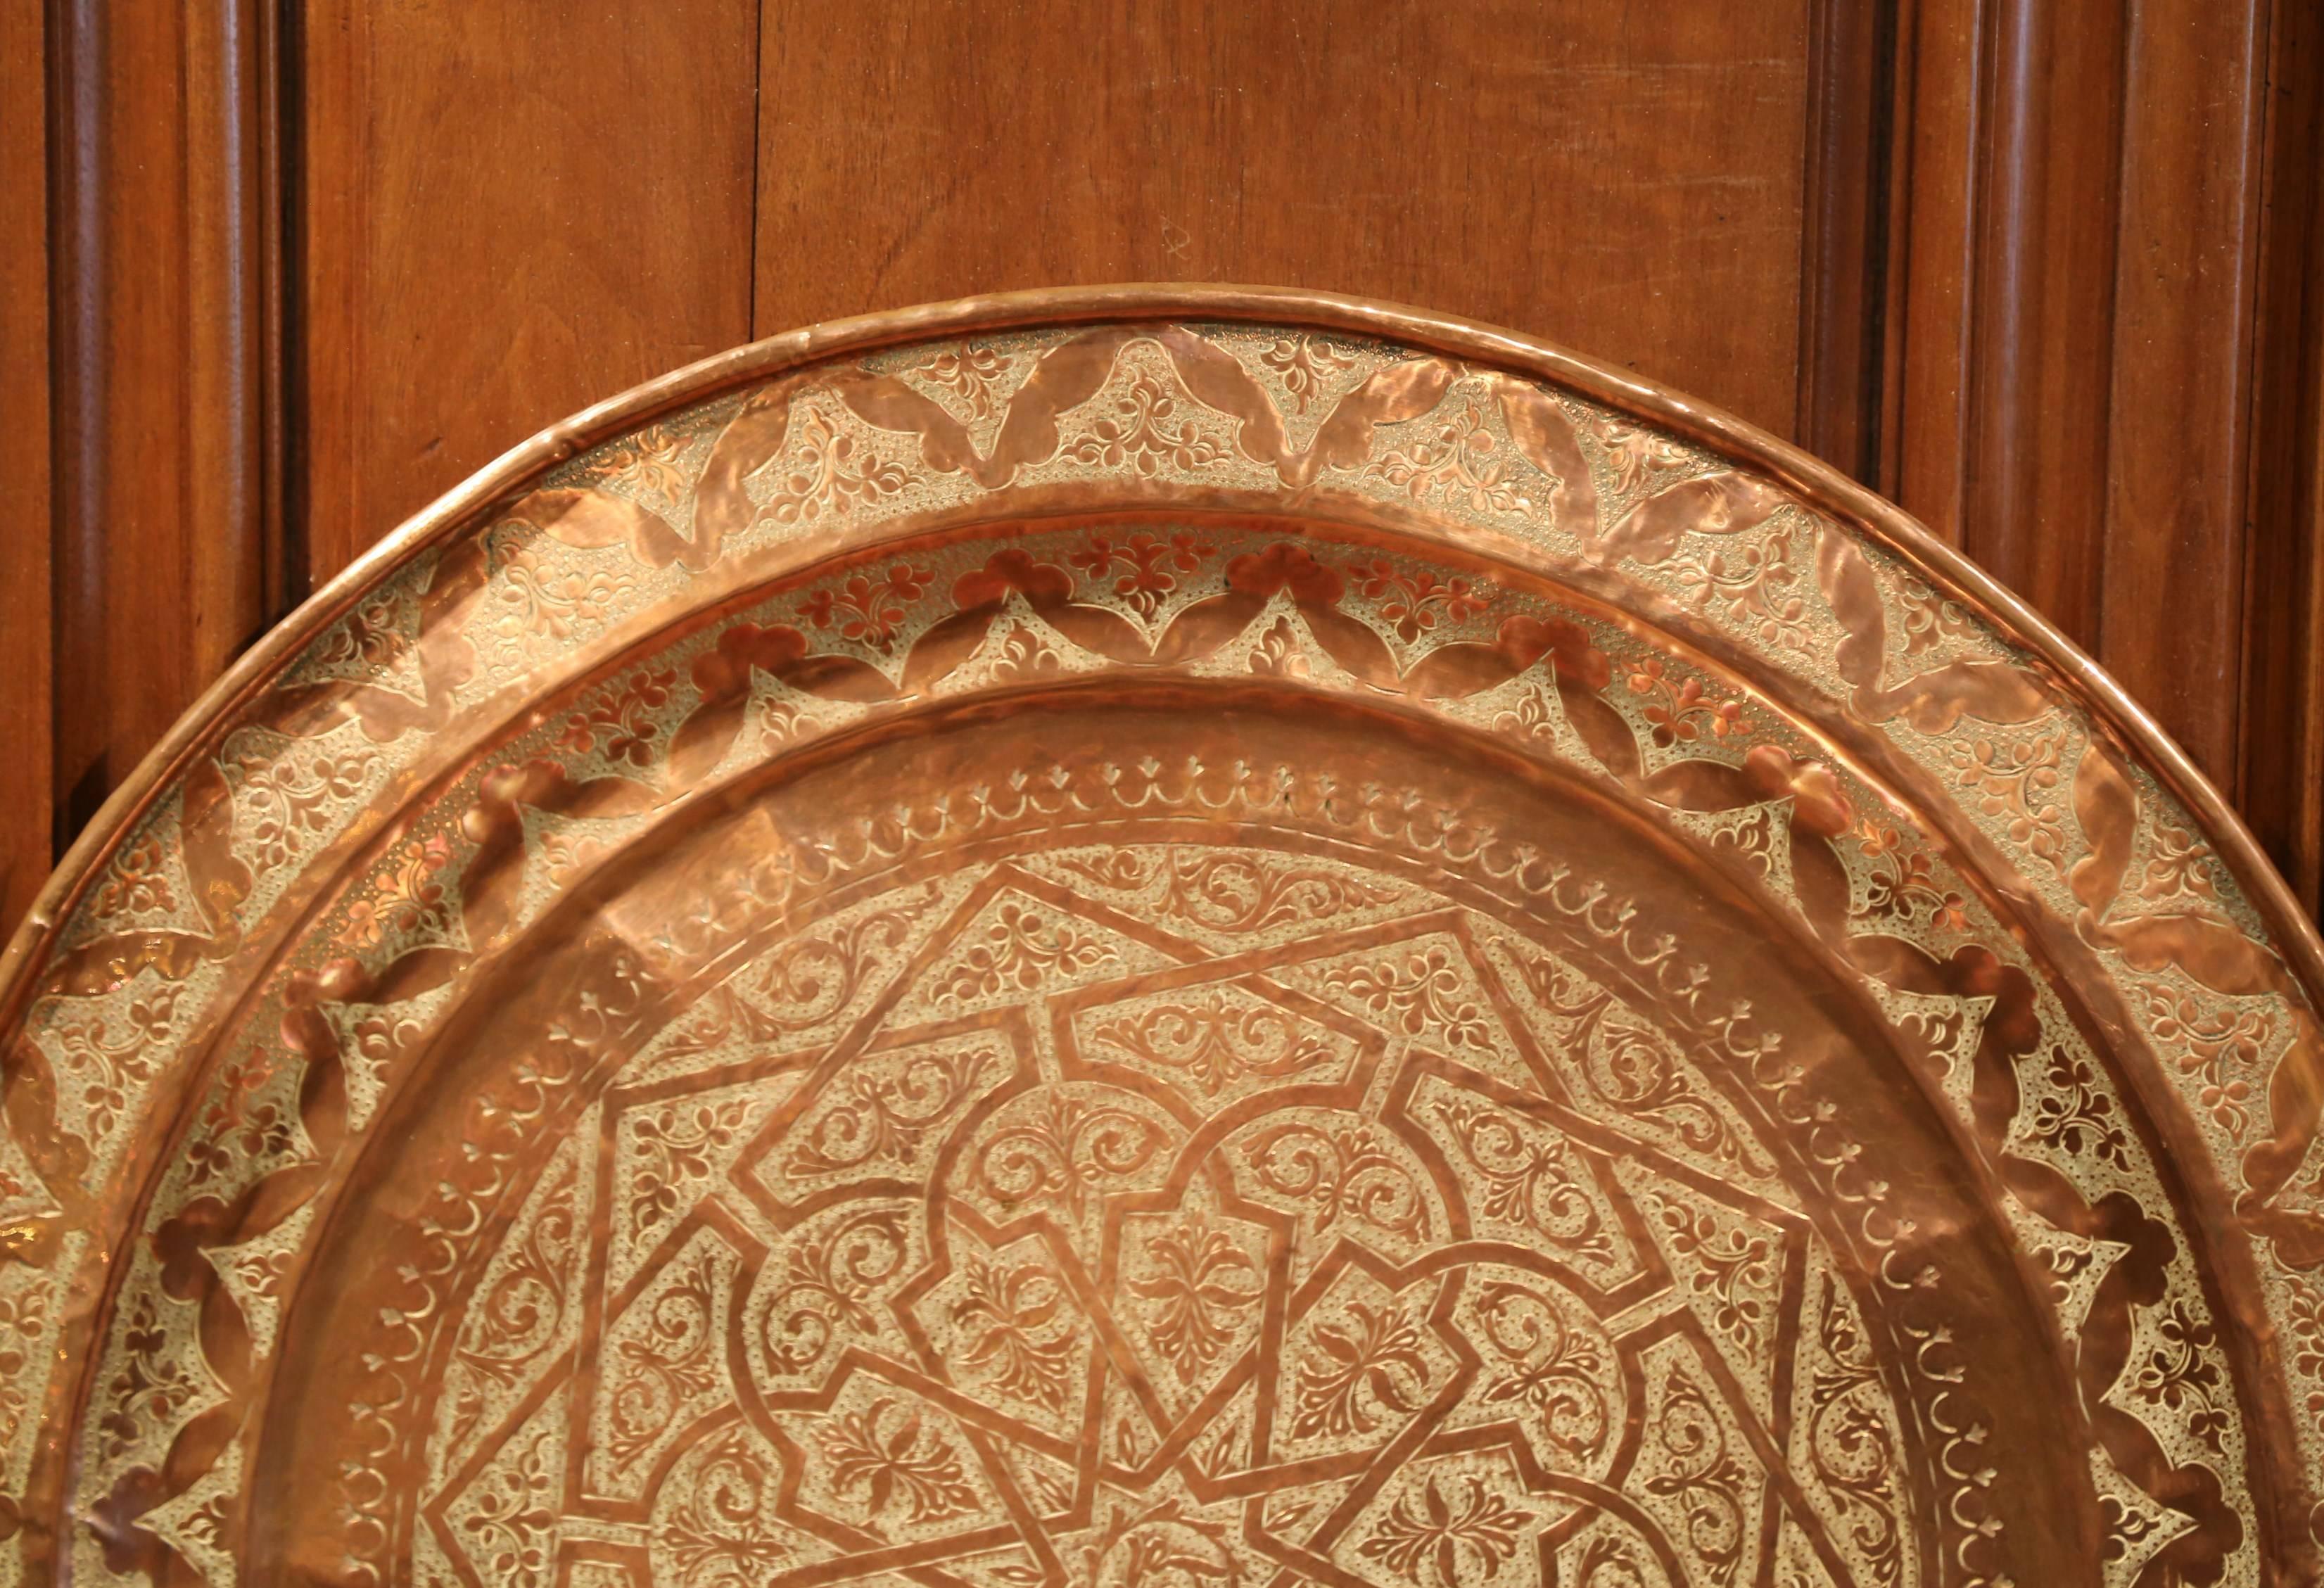 Baroque Early 20th Century French Round Copper Tray with Engraved Geometric Motifs